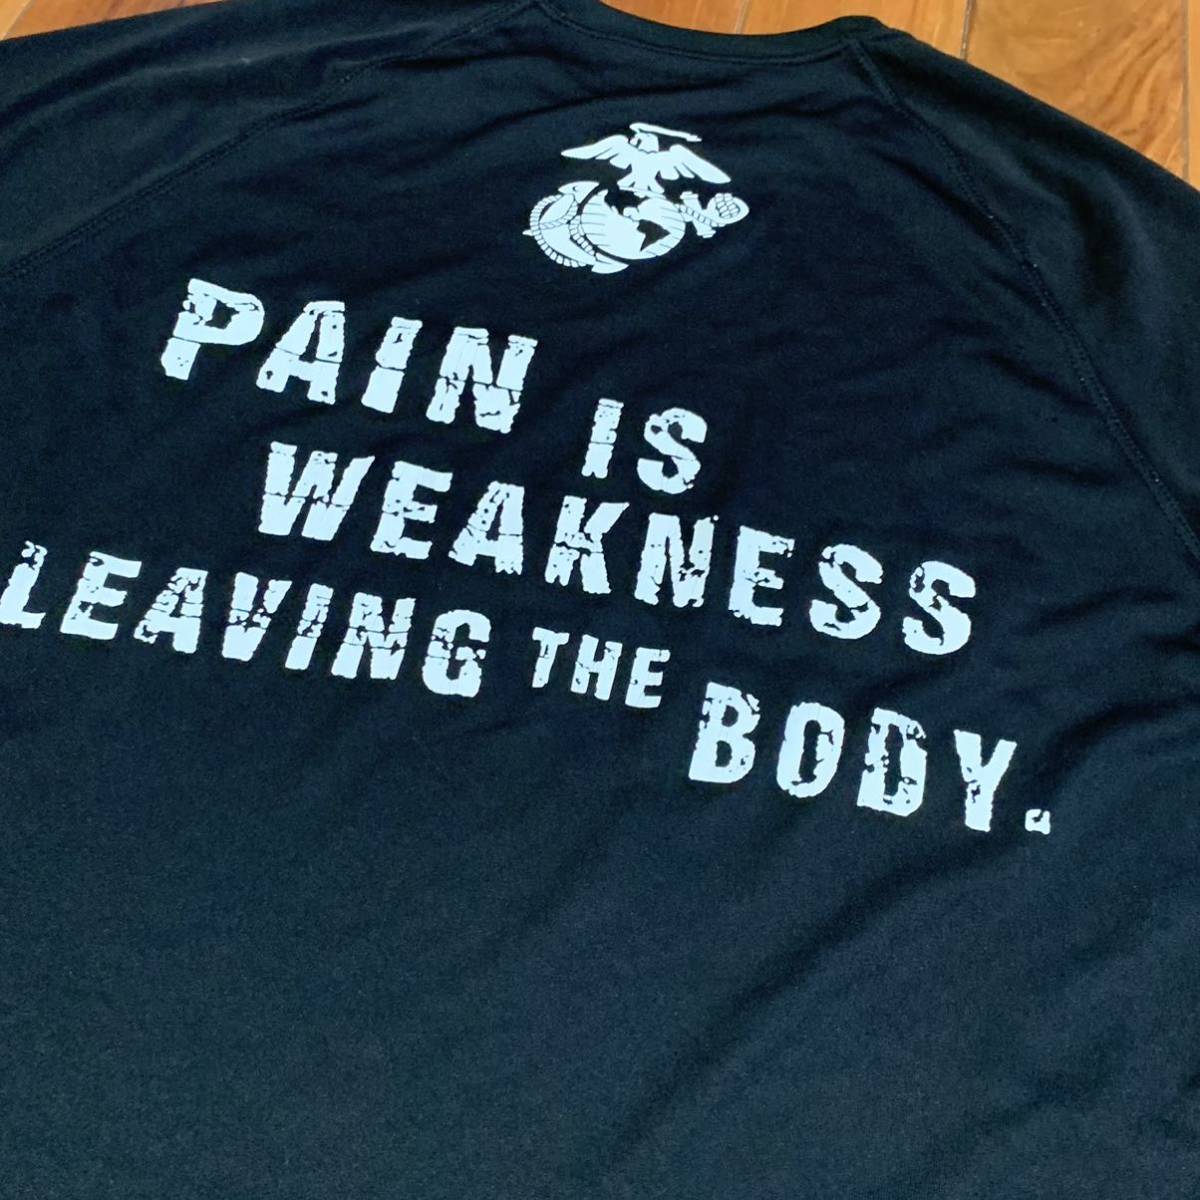  Okinawa the US armed forces discharge goods Under Armor PAIN IS WEAKNESS T-shirt training running MEDIUM BLACK ( control number Q233)